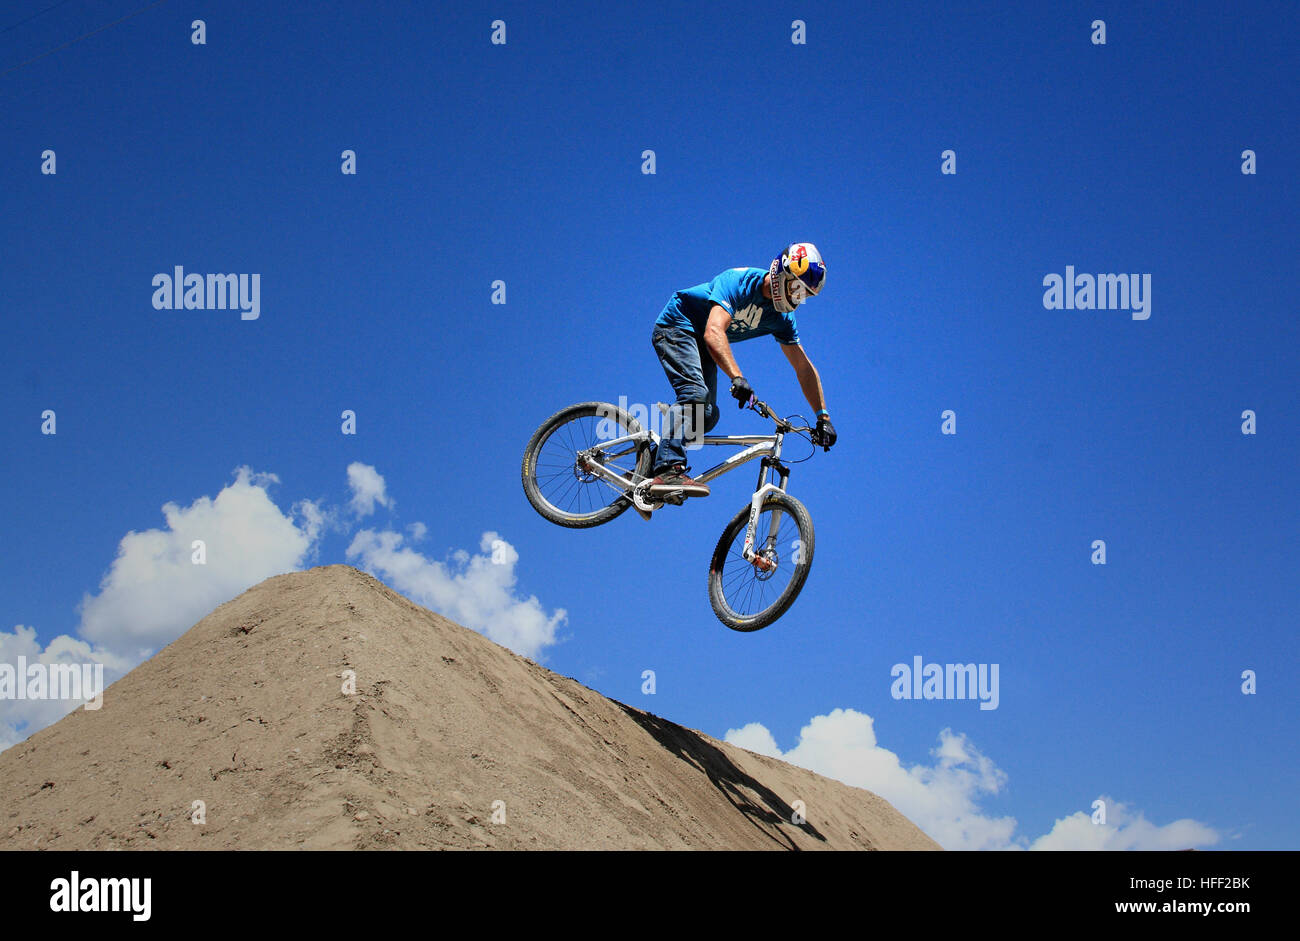 Mountain biking stunt jumps offer trick riding and acrobatic stunts in Winter Park, Colorado Stock Photo